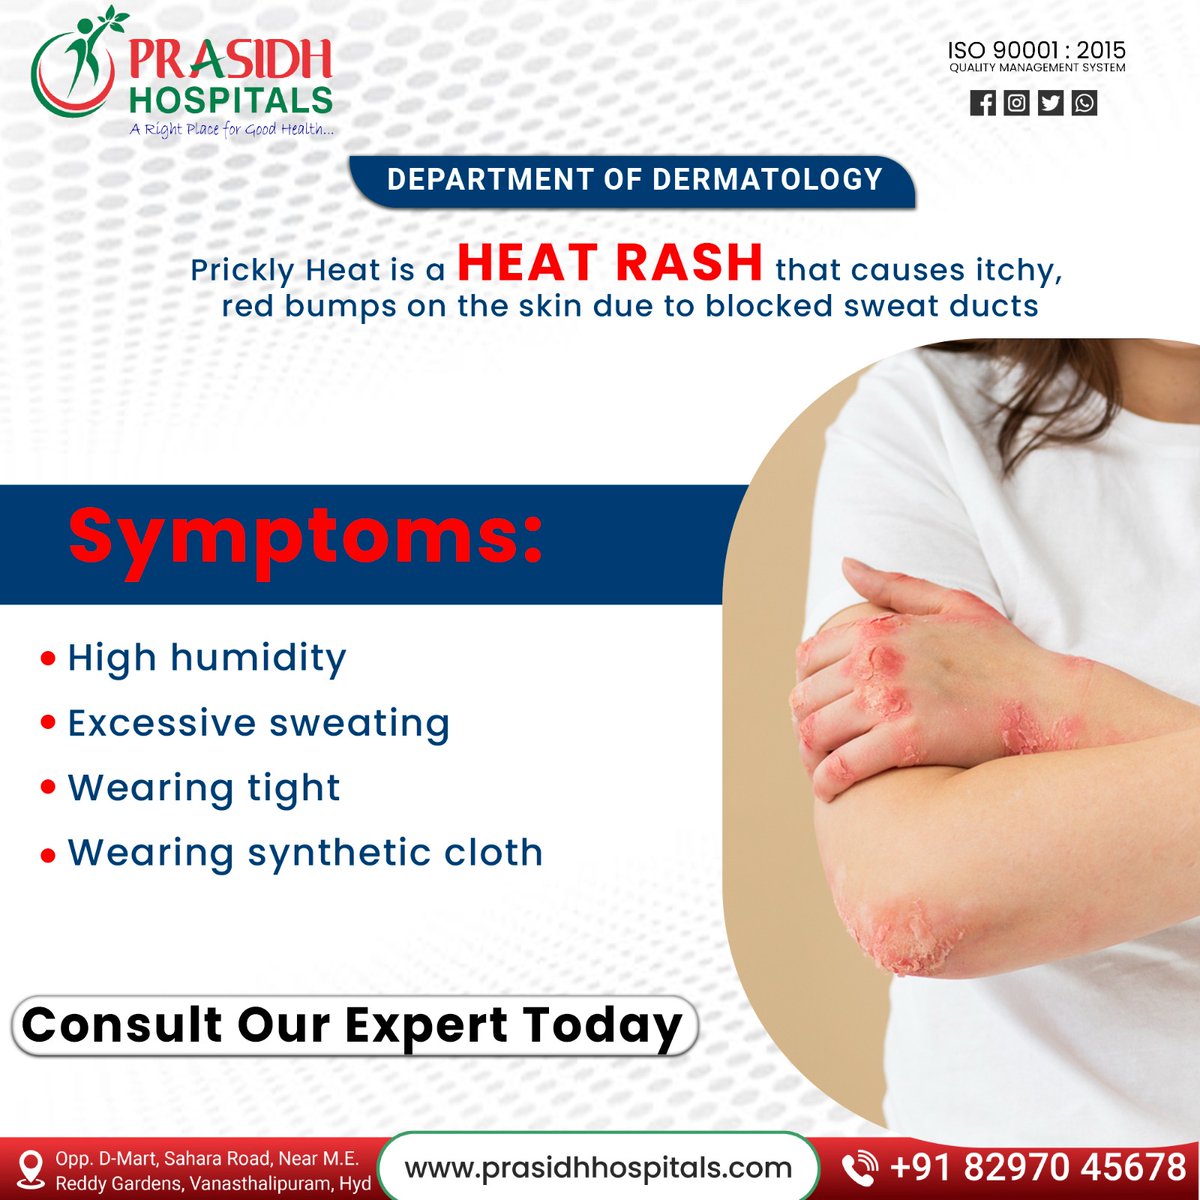 Experience relief from Prickly Heat at Prasidh Hospitals. Prickly Heat, those irritating red bumps caused by heat and sweat, affects countless individuals worldwide. With a focus on patient care and advanced dermatological solutions, 

#dermatology #heatrash #redbumps